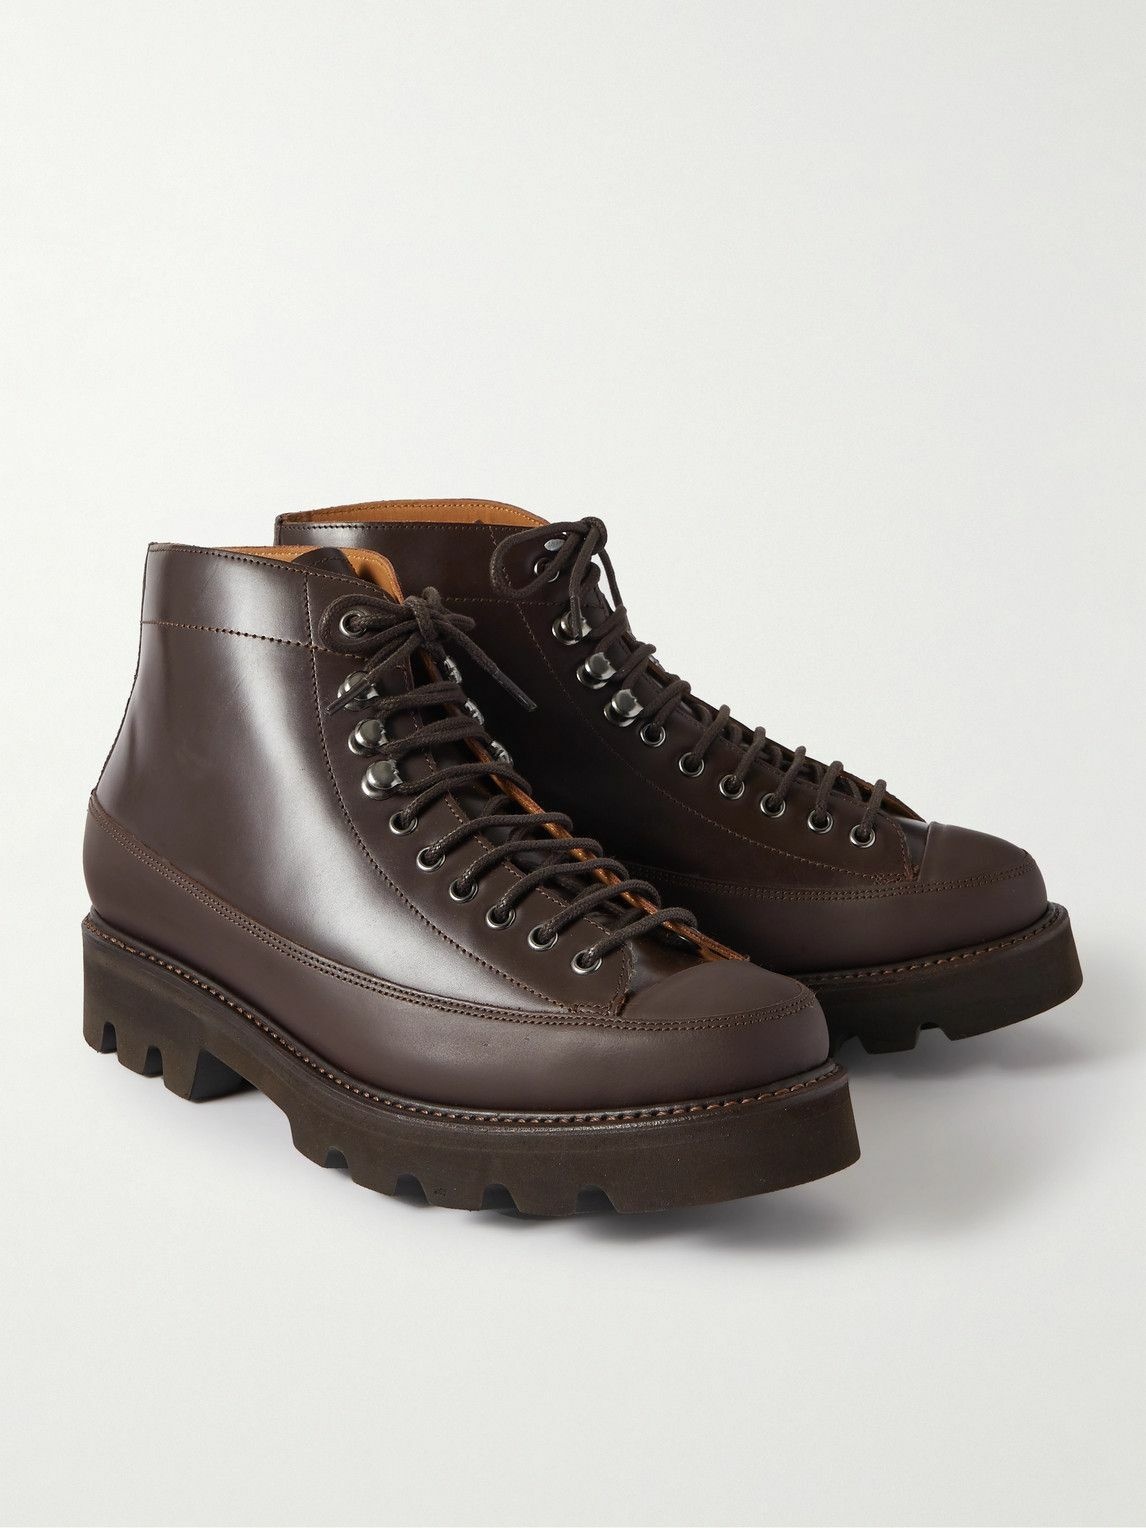 Grenson - Augustus Leather Boots - Brown Grenson